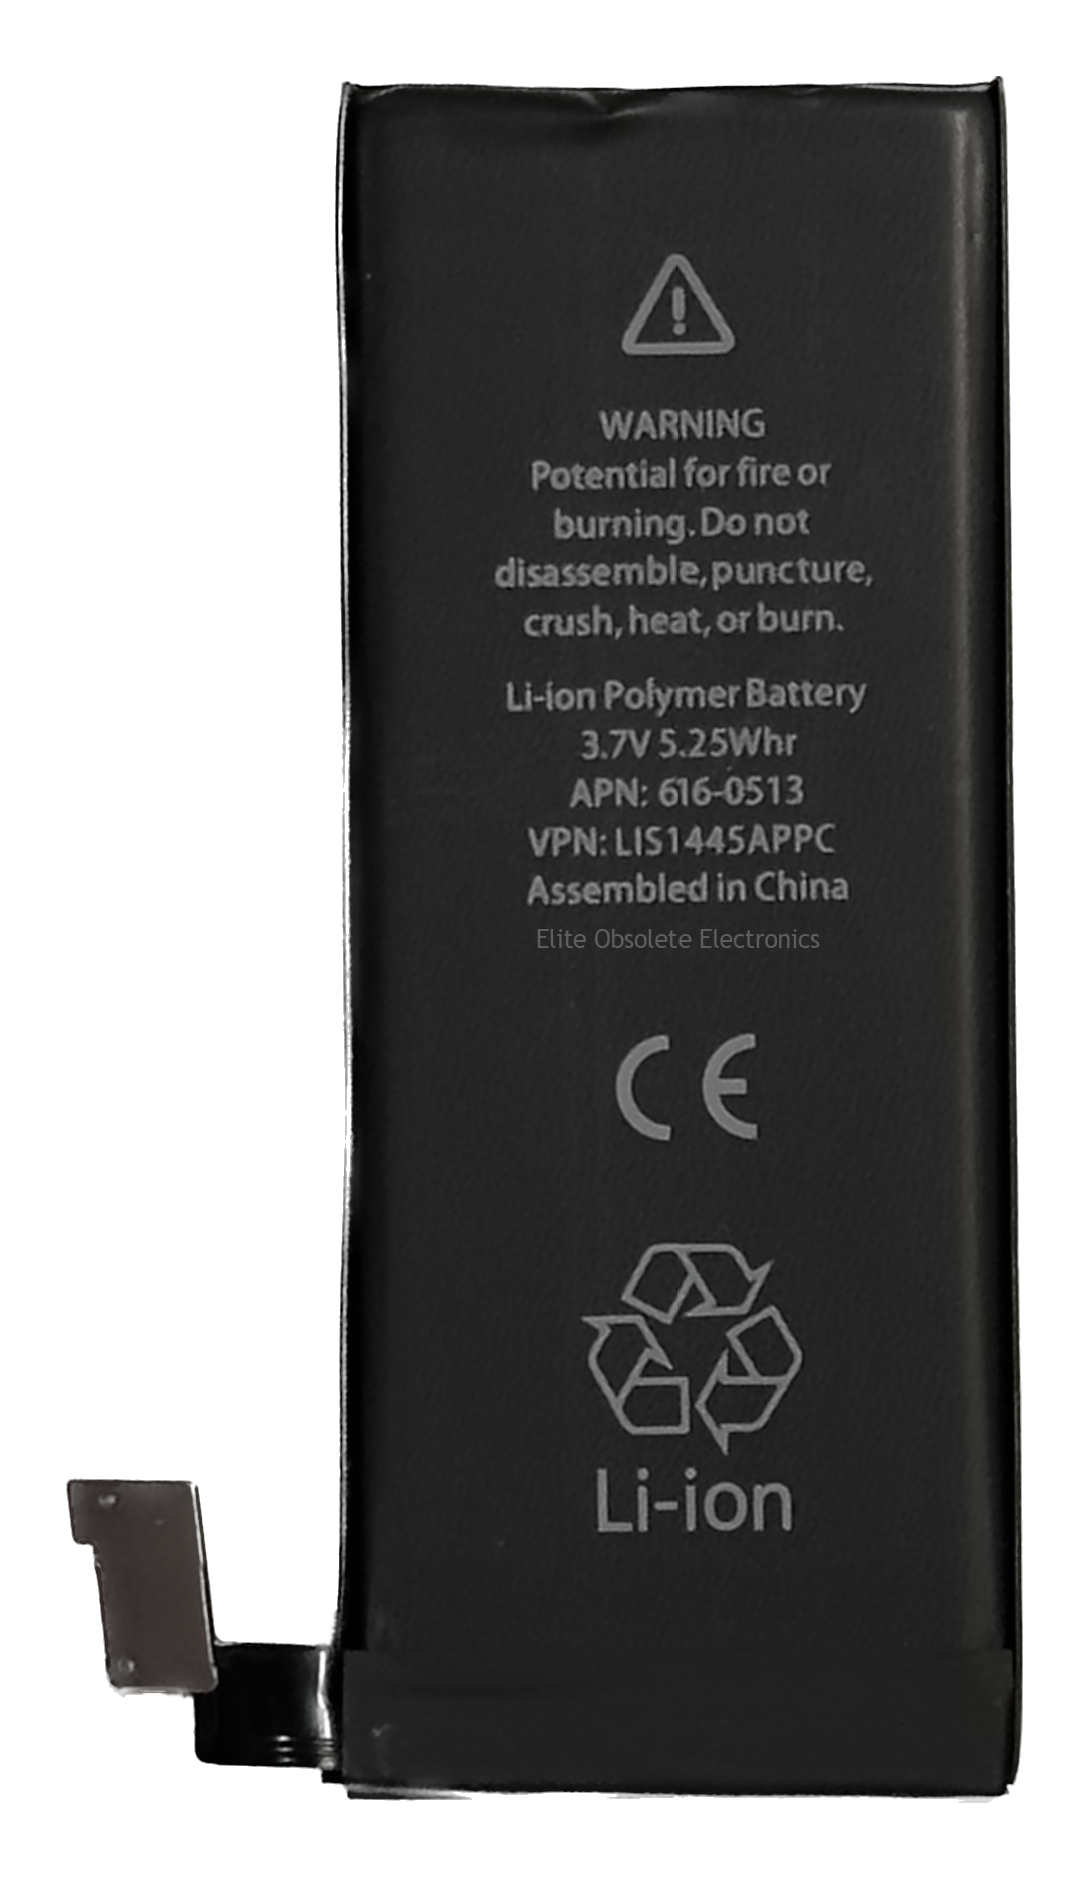 New 1420mah Lithium-Ion Polymer Battery for Apple iPhone 4 A1332 A1349